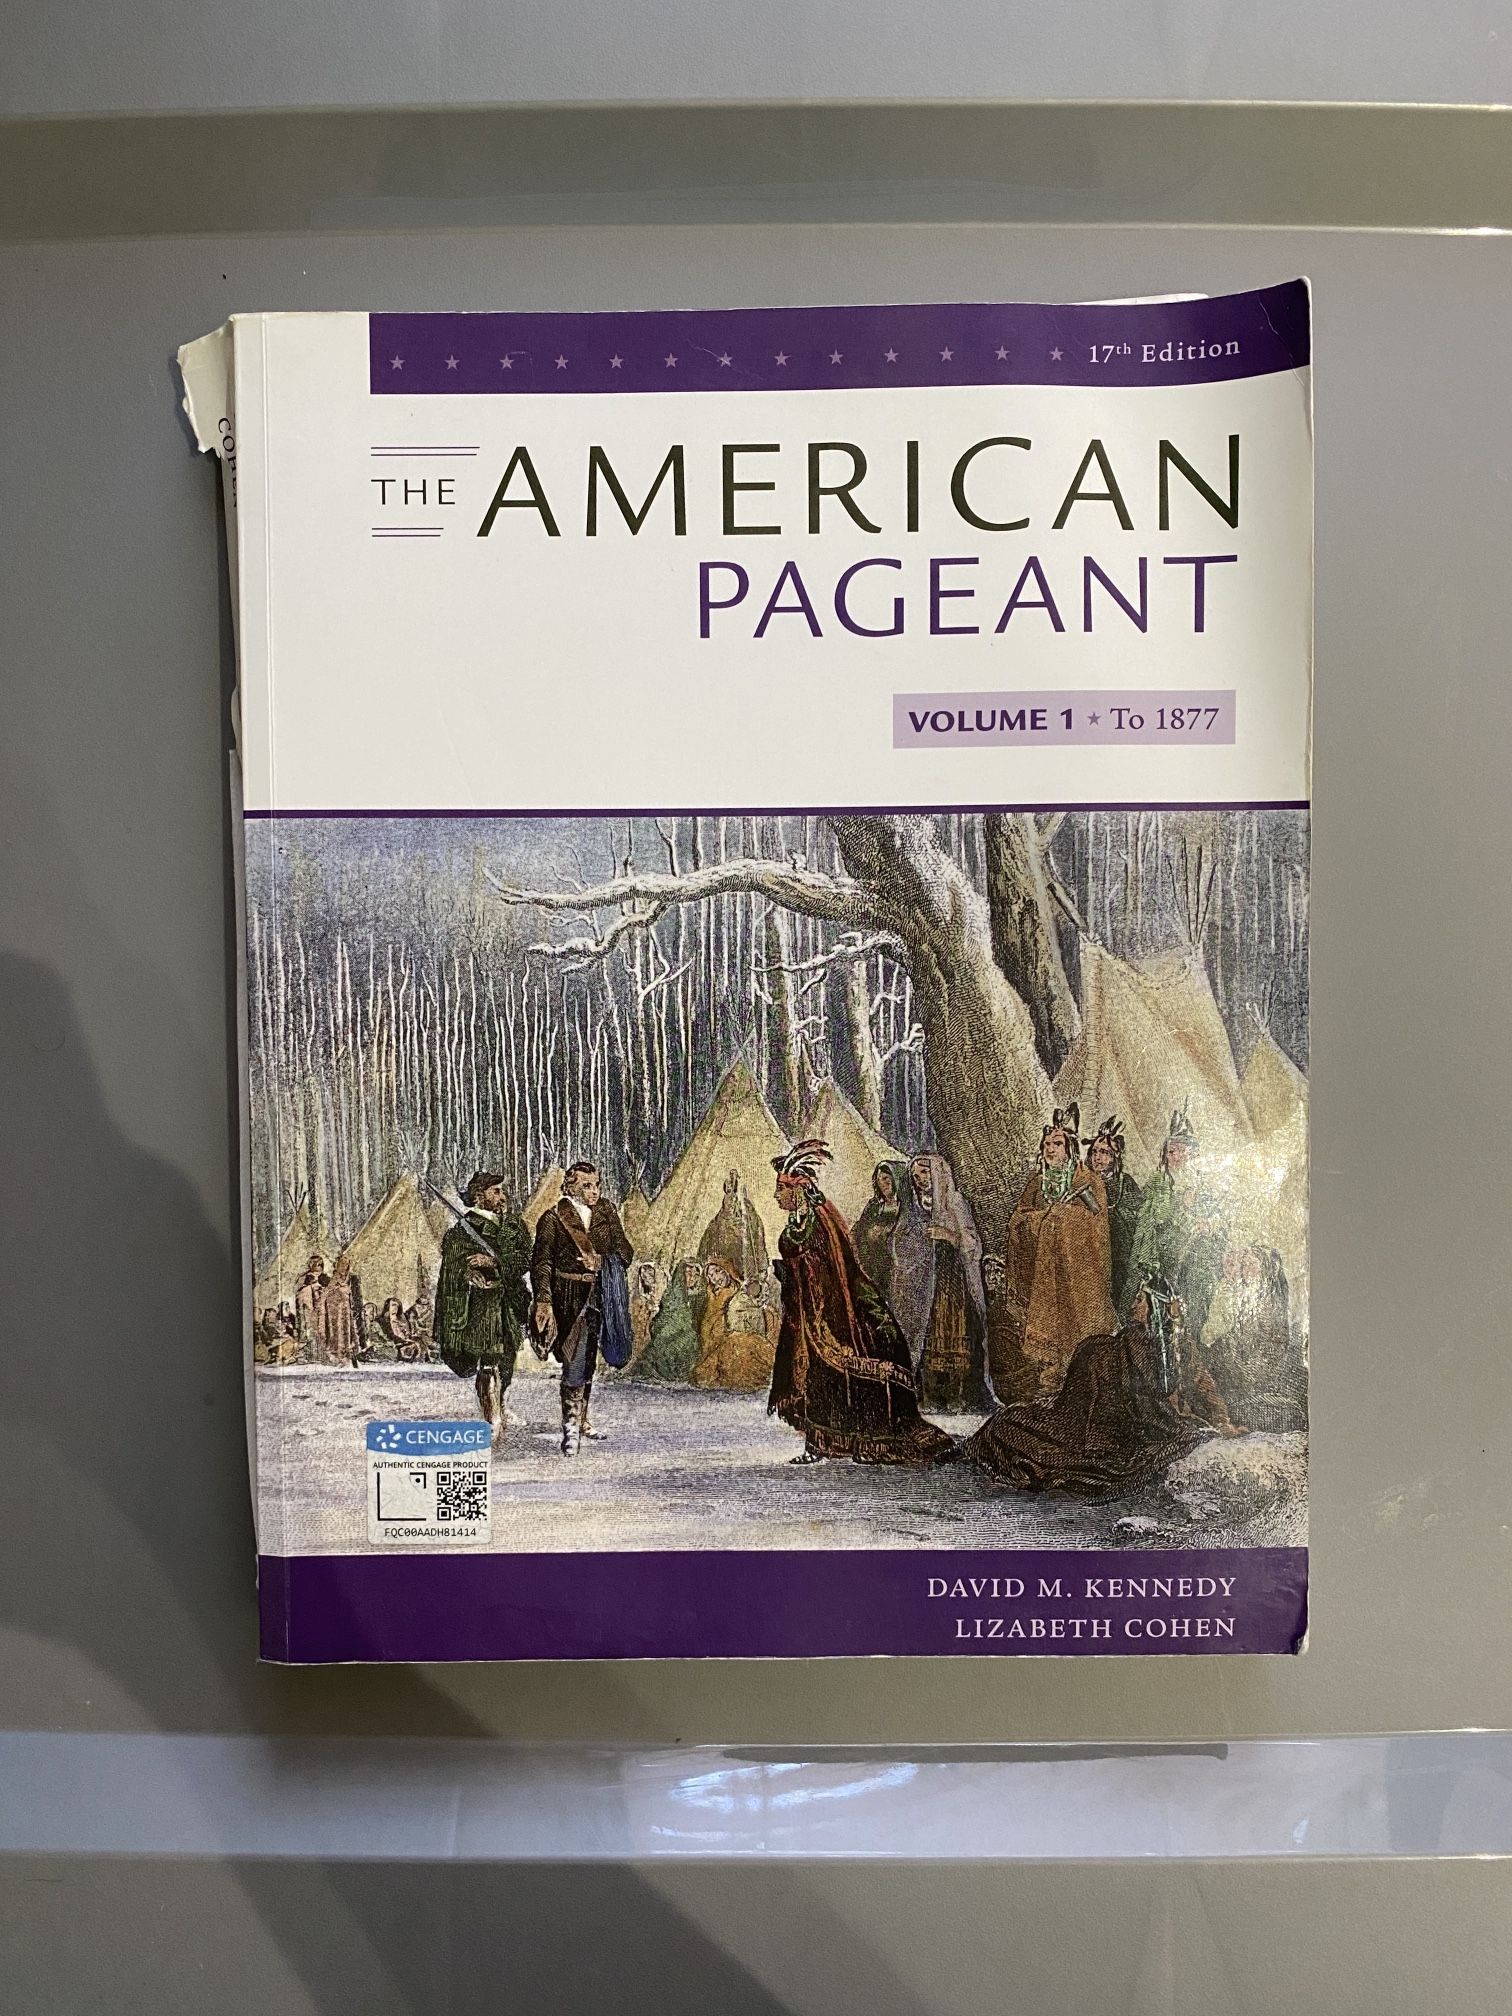 The American Pageant, Volume I by Kennedy, David M., Cohen, Lizabeth